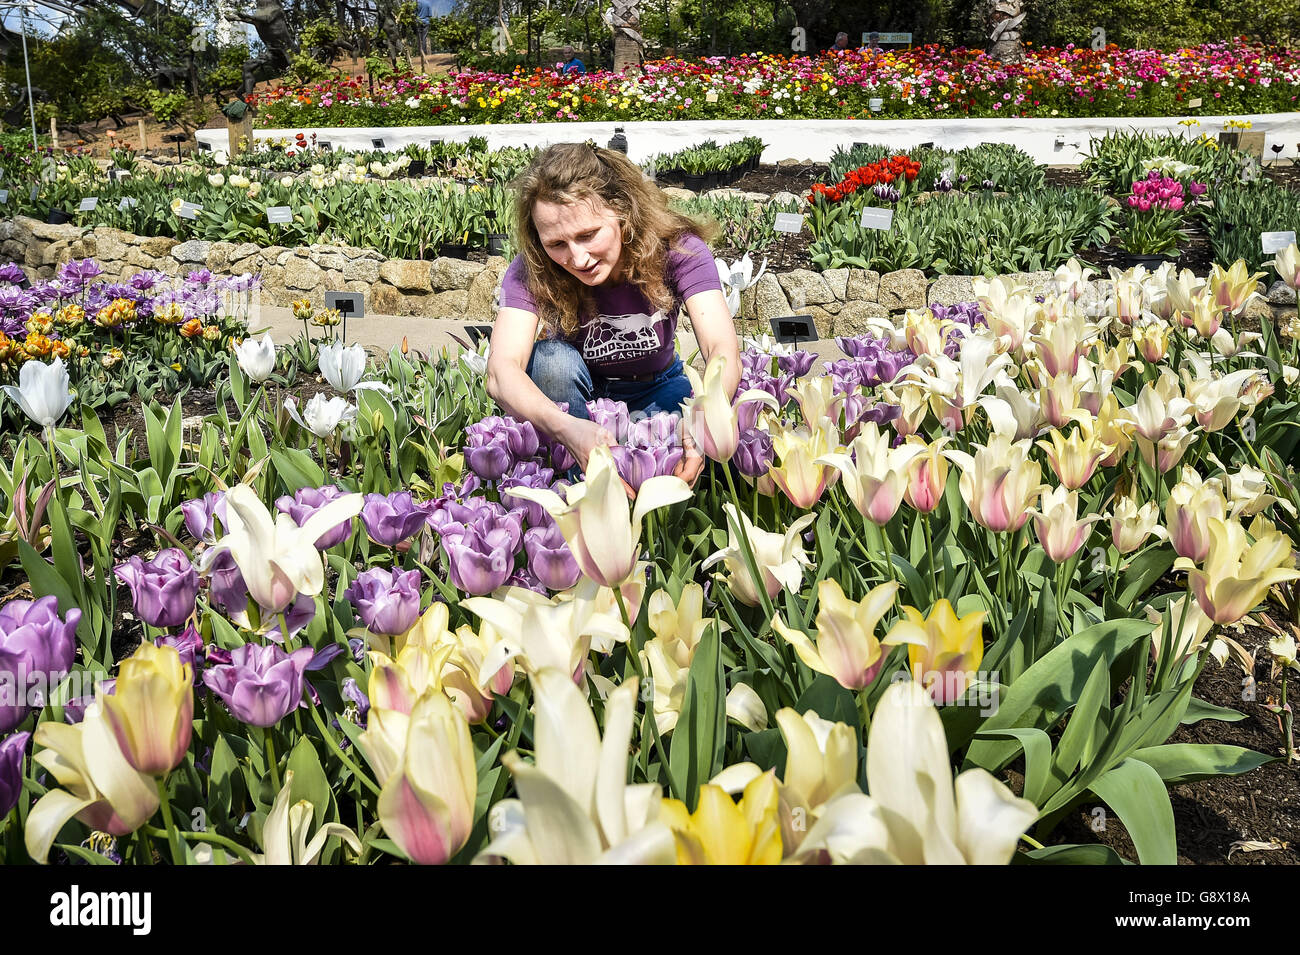 Catherine Cutler, Mediterranean Biome Supervisor at the Eden Project in Cornwall, tends to tulips in bloom. Spring is helped along by the garden's huge biomes creating a Mediterranean-style climate, giving spring flowers even more impact and vibrancy. Stock Photo